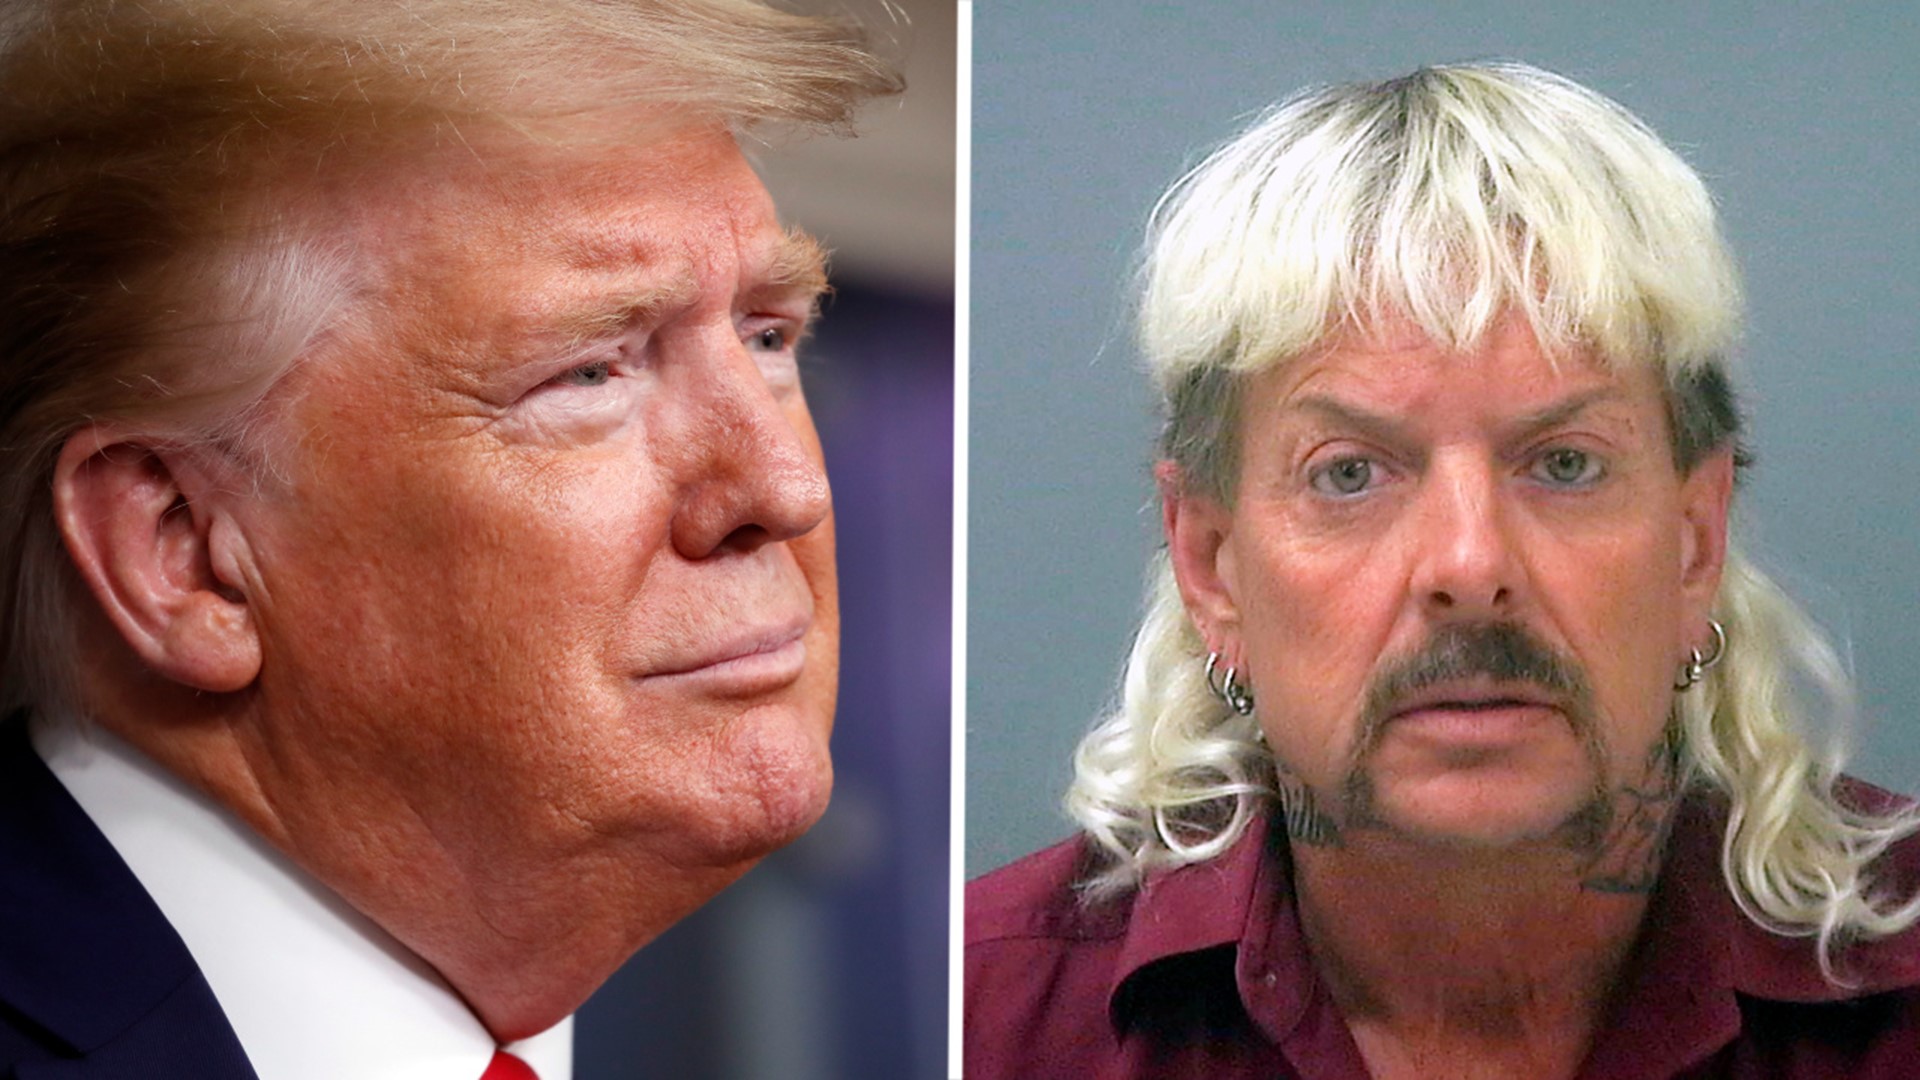 A reporter asked Trump if he'd consider a pardon for Joe Exotic. Trump says he'll "take a look."